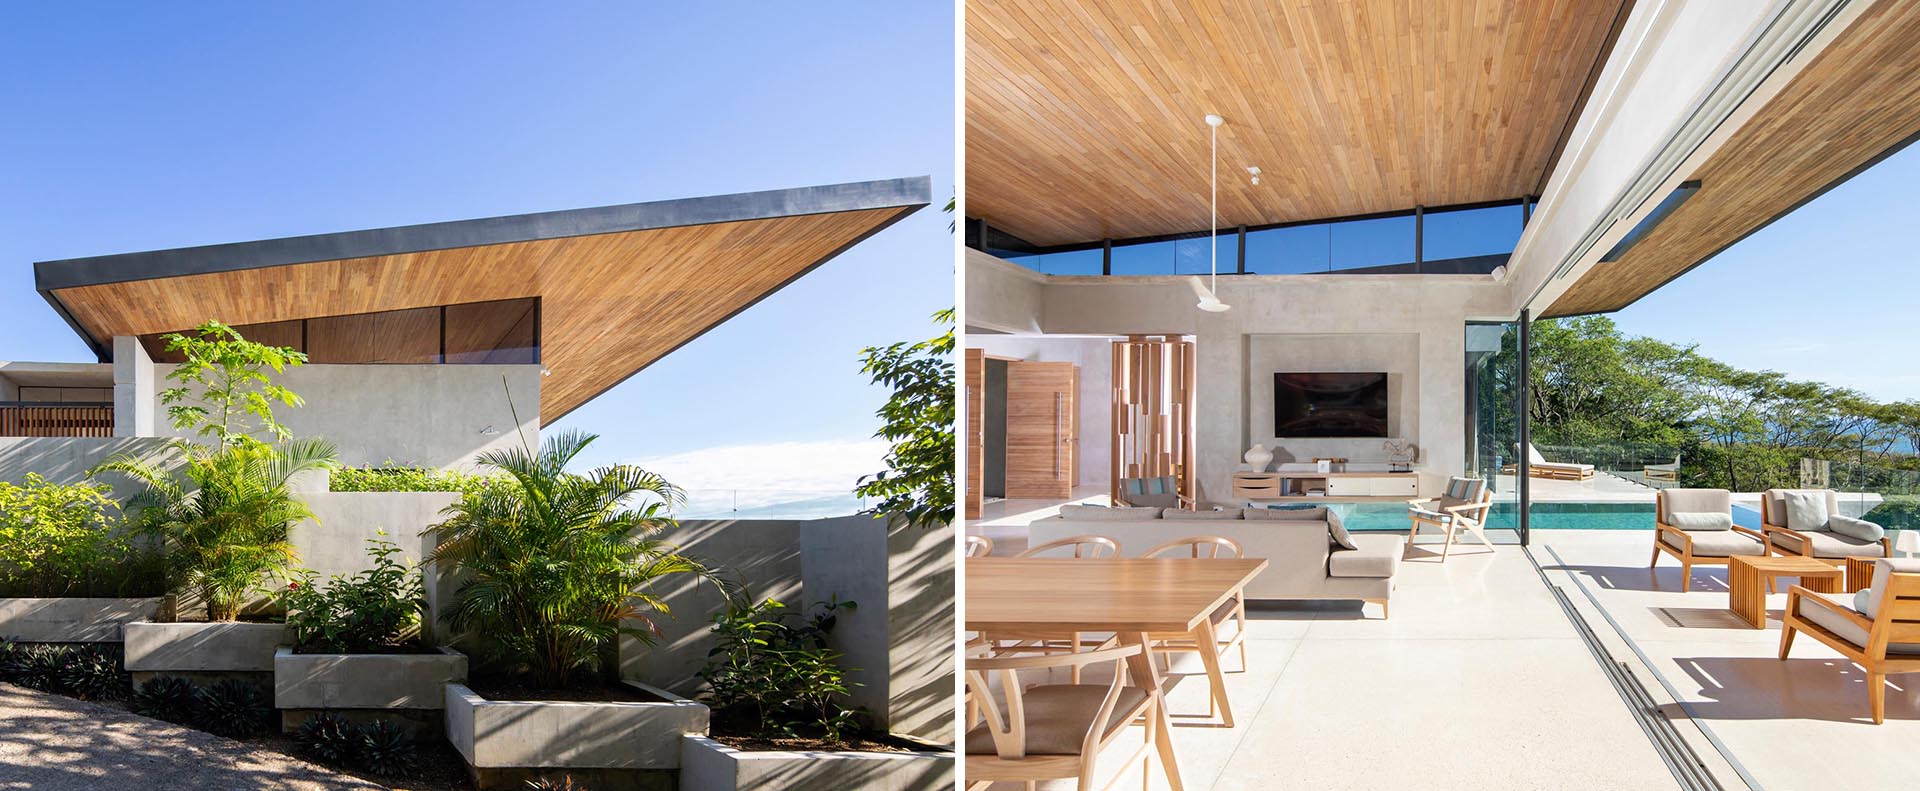 The sweeping and expansive angled roof of this modern home, which is lined with wood, allows for cross ventilation during the rainy and humid months.